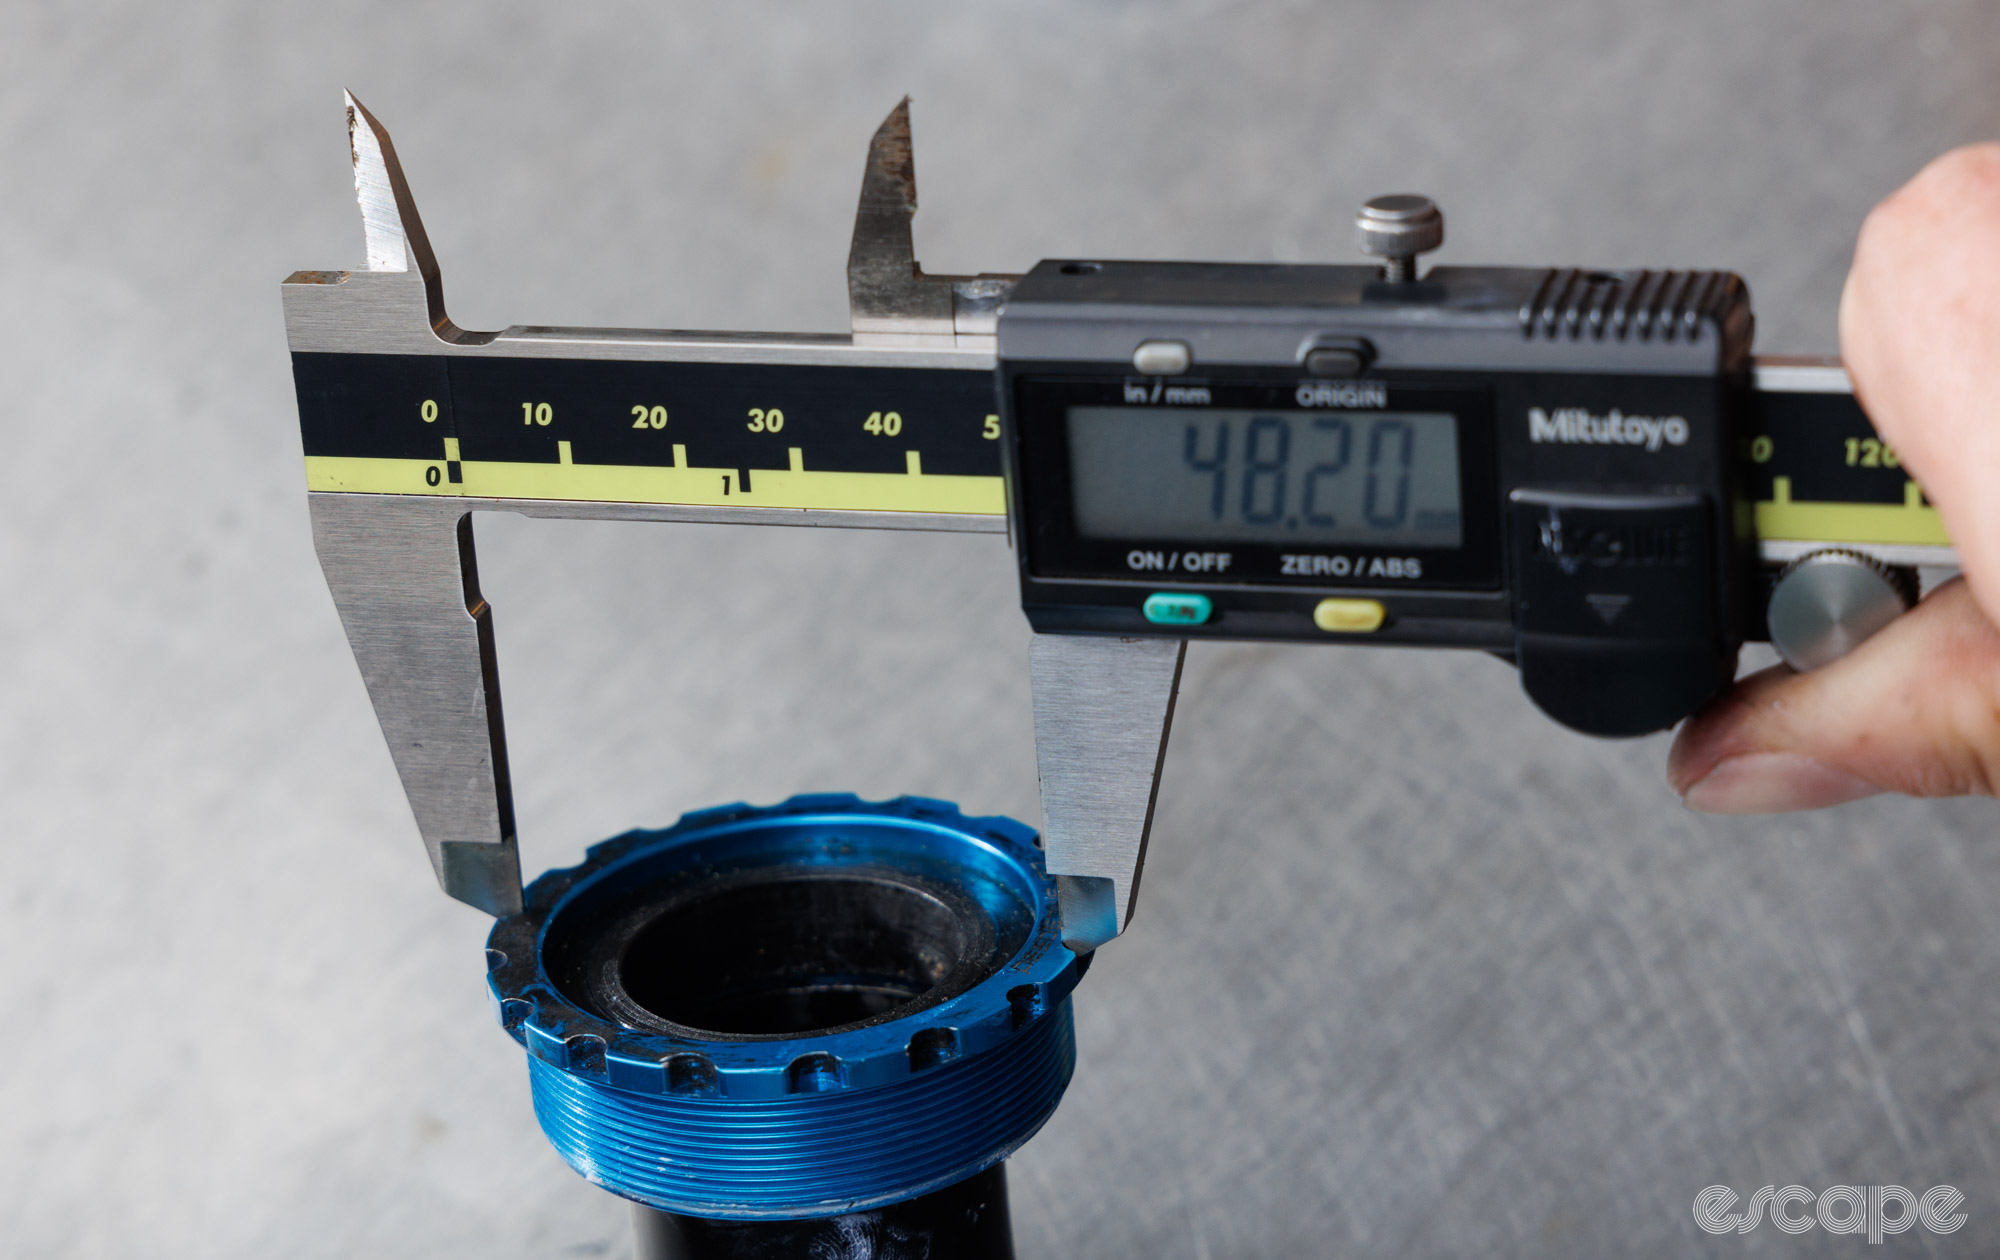 Measuring the diameter between two opposing tool notches with digital calipers. 